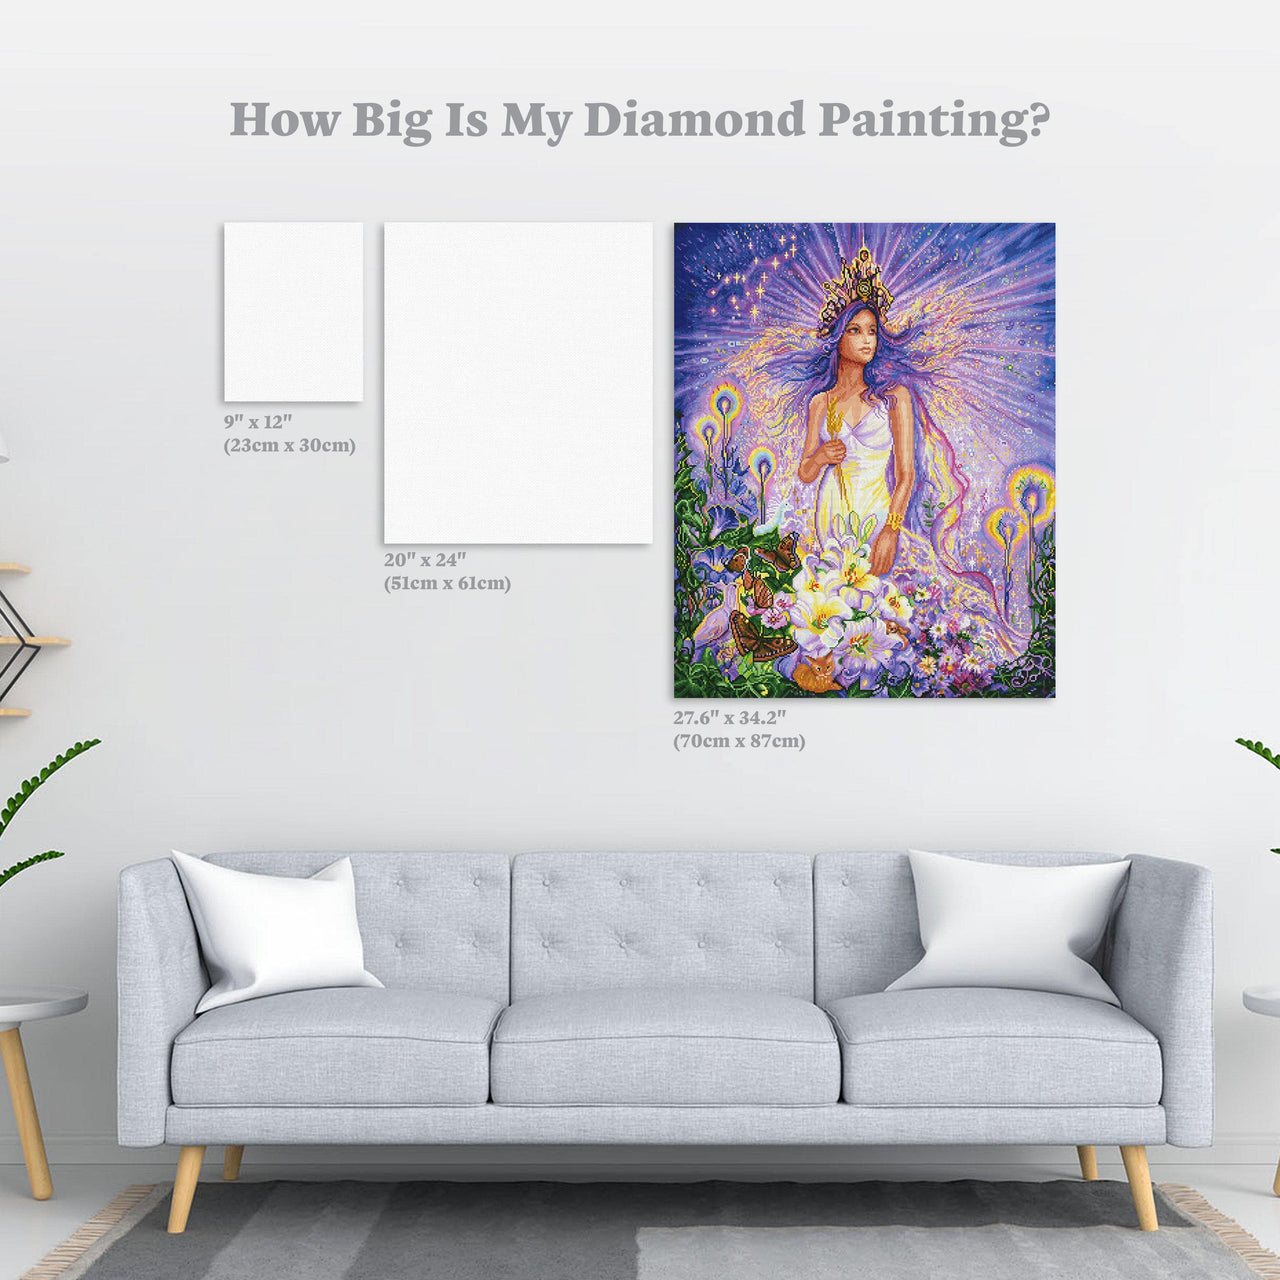 Diamond Painting Virgo 27.6" x 34.2″ (70cm x 87cm) / Square with 55 Colors including 3 ABs / 95,559